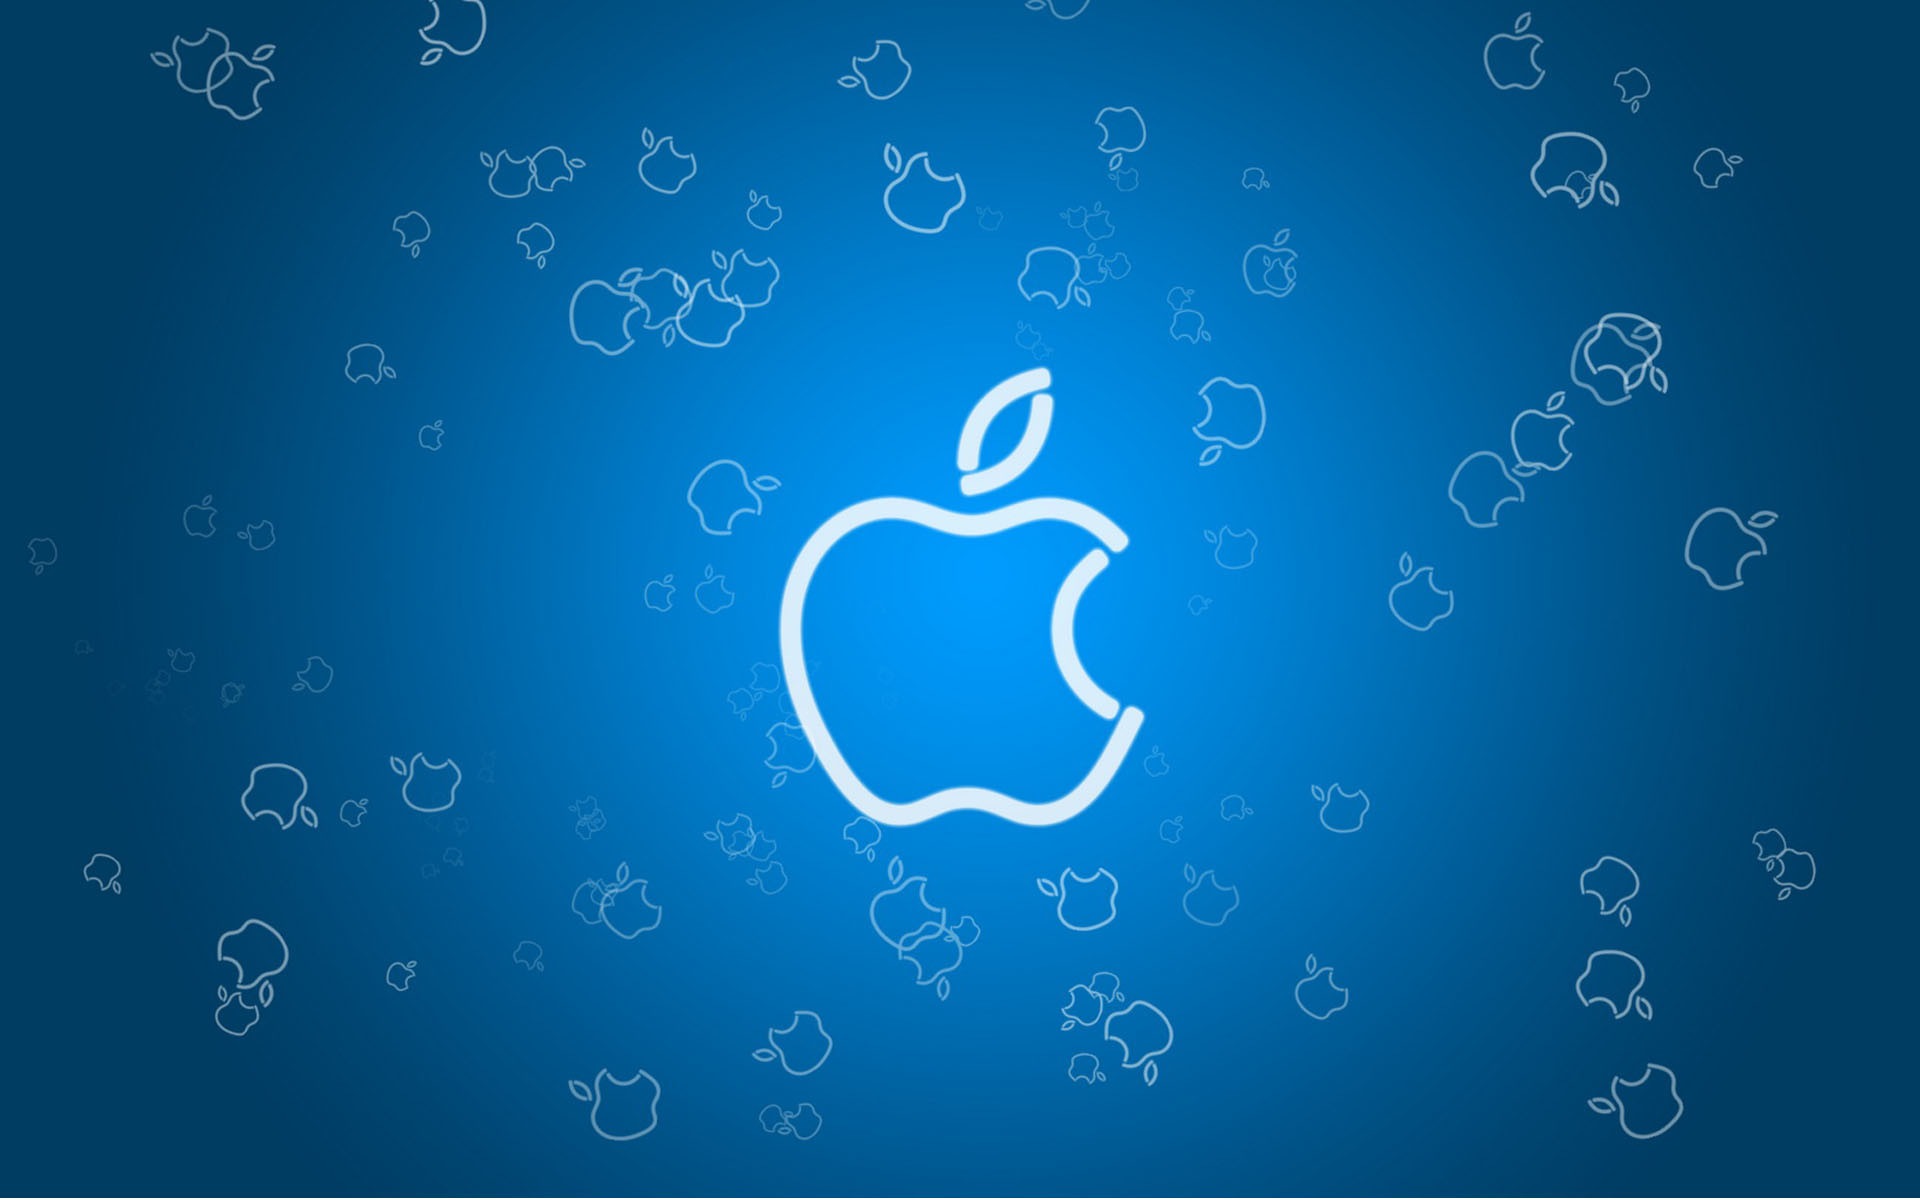 1920x1200 Apple Galaxy wallpaper for your iMac | Wallpapers | Pinterest | Apple  galaxy wallpaper and Wallpaper